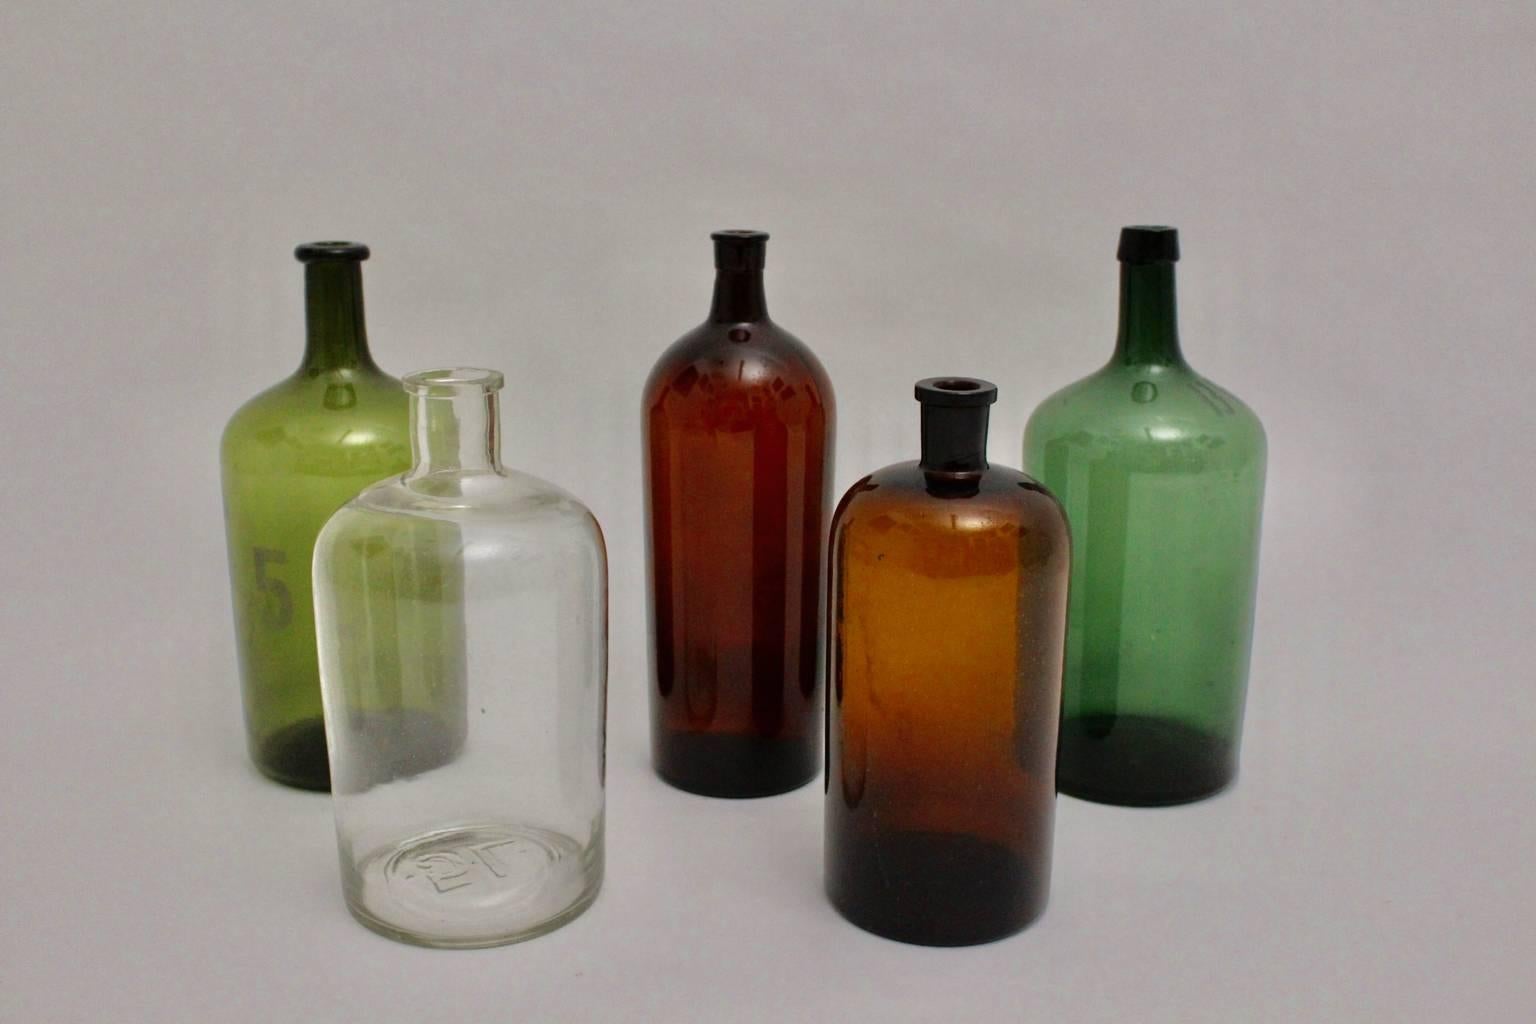 Five handblown wine bottles in the colors brown, green and colorless with various measures from 3 liters to 5 liters.

The condition is excellent. The set of five bottles are carefully cleaned and all five bottles have no spots or chips.

The